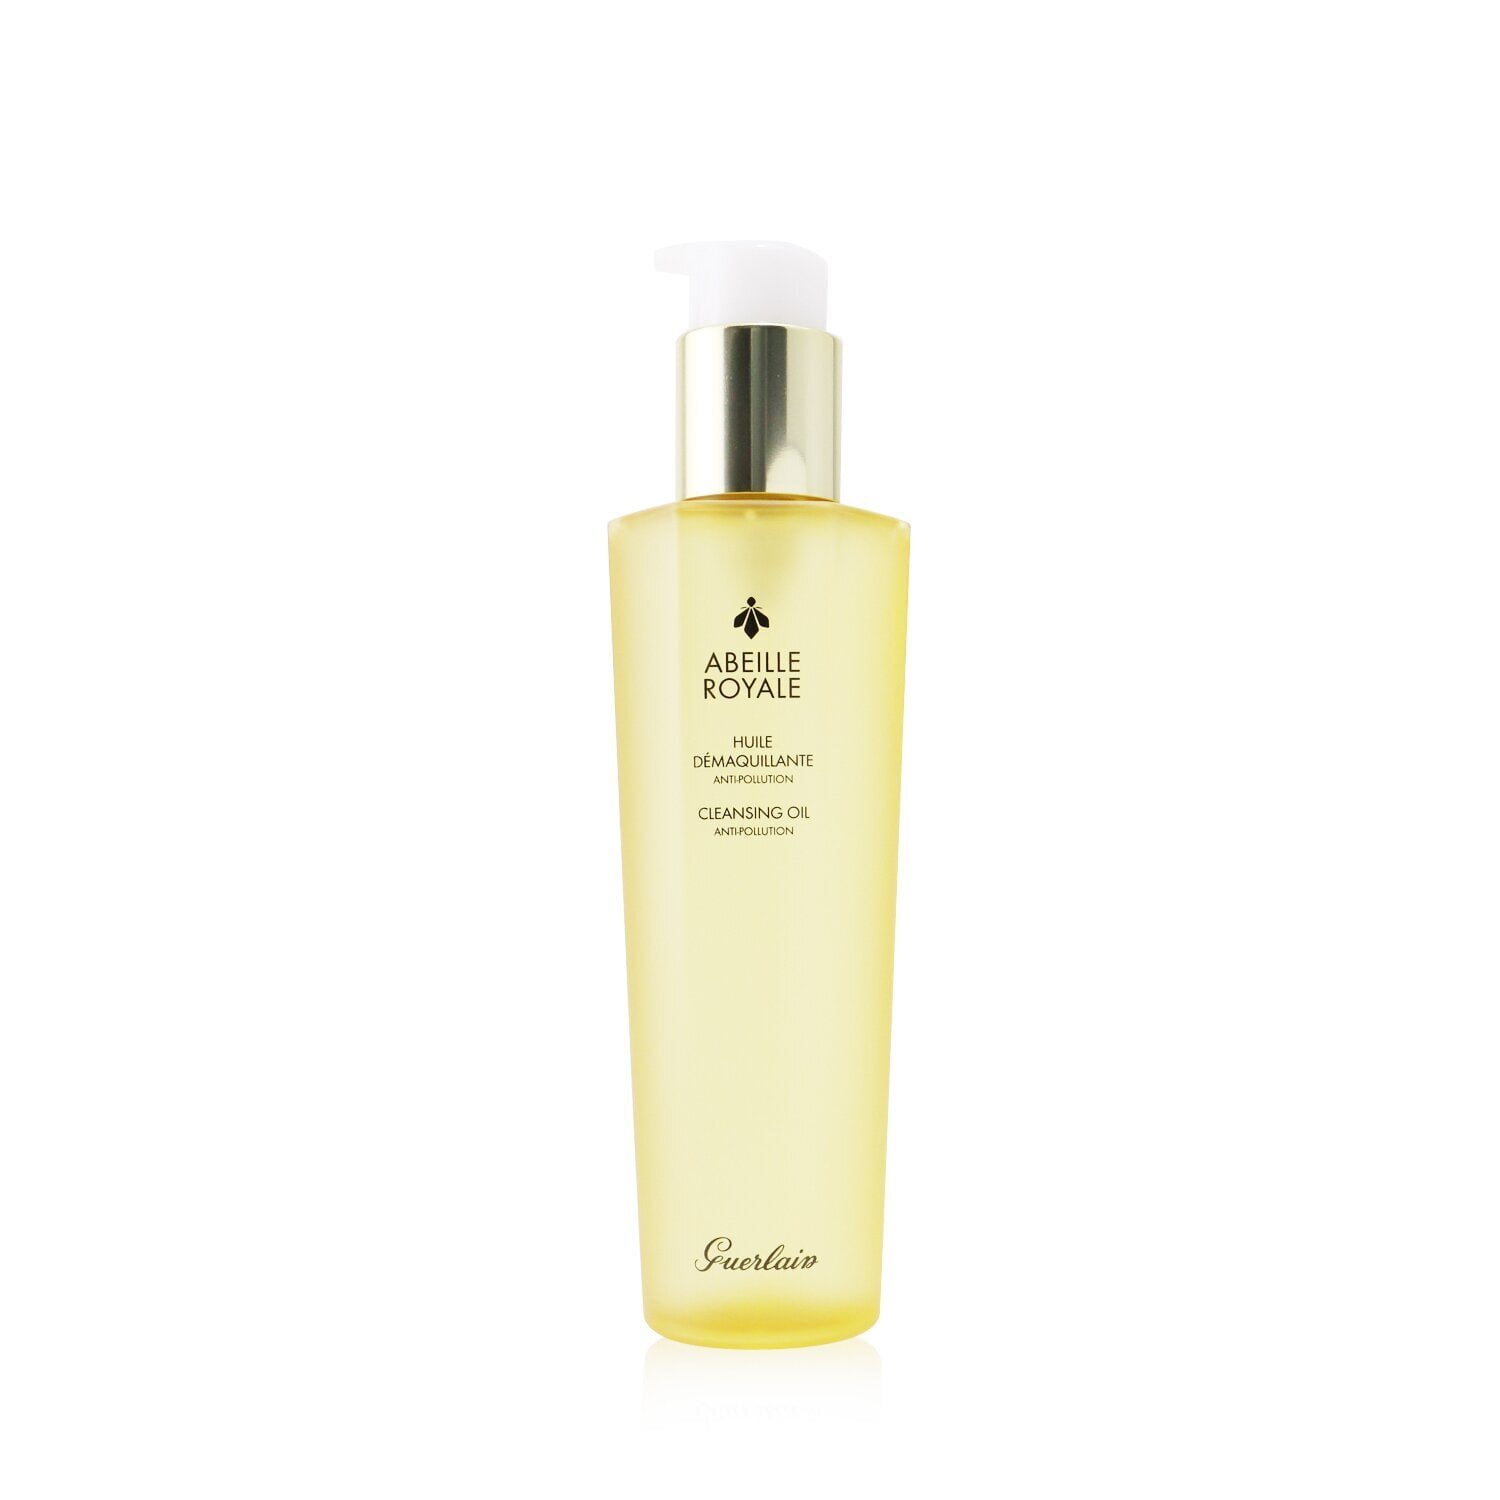 CHANEL L'HUILE 5 oz. Anti-Pollution Cleansing Oil